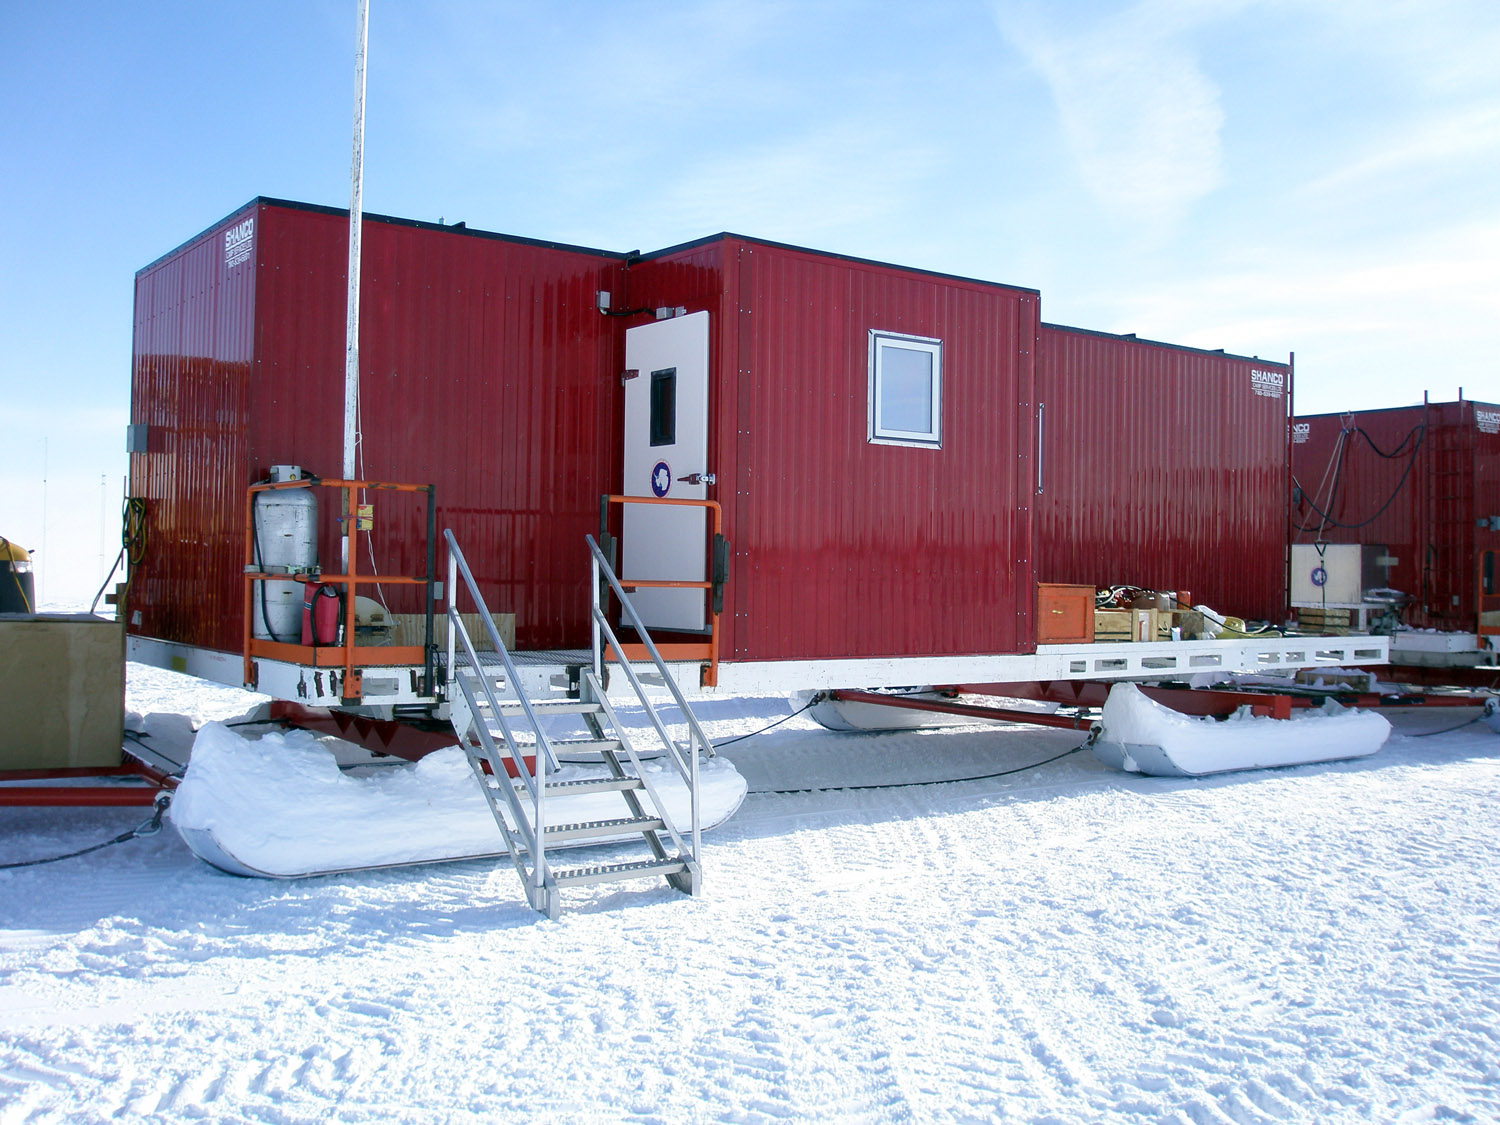 Vehicles and equipment of the South Pole Traverse - 03